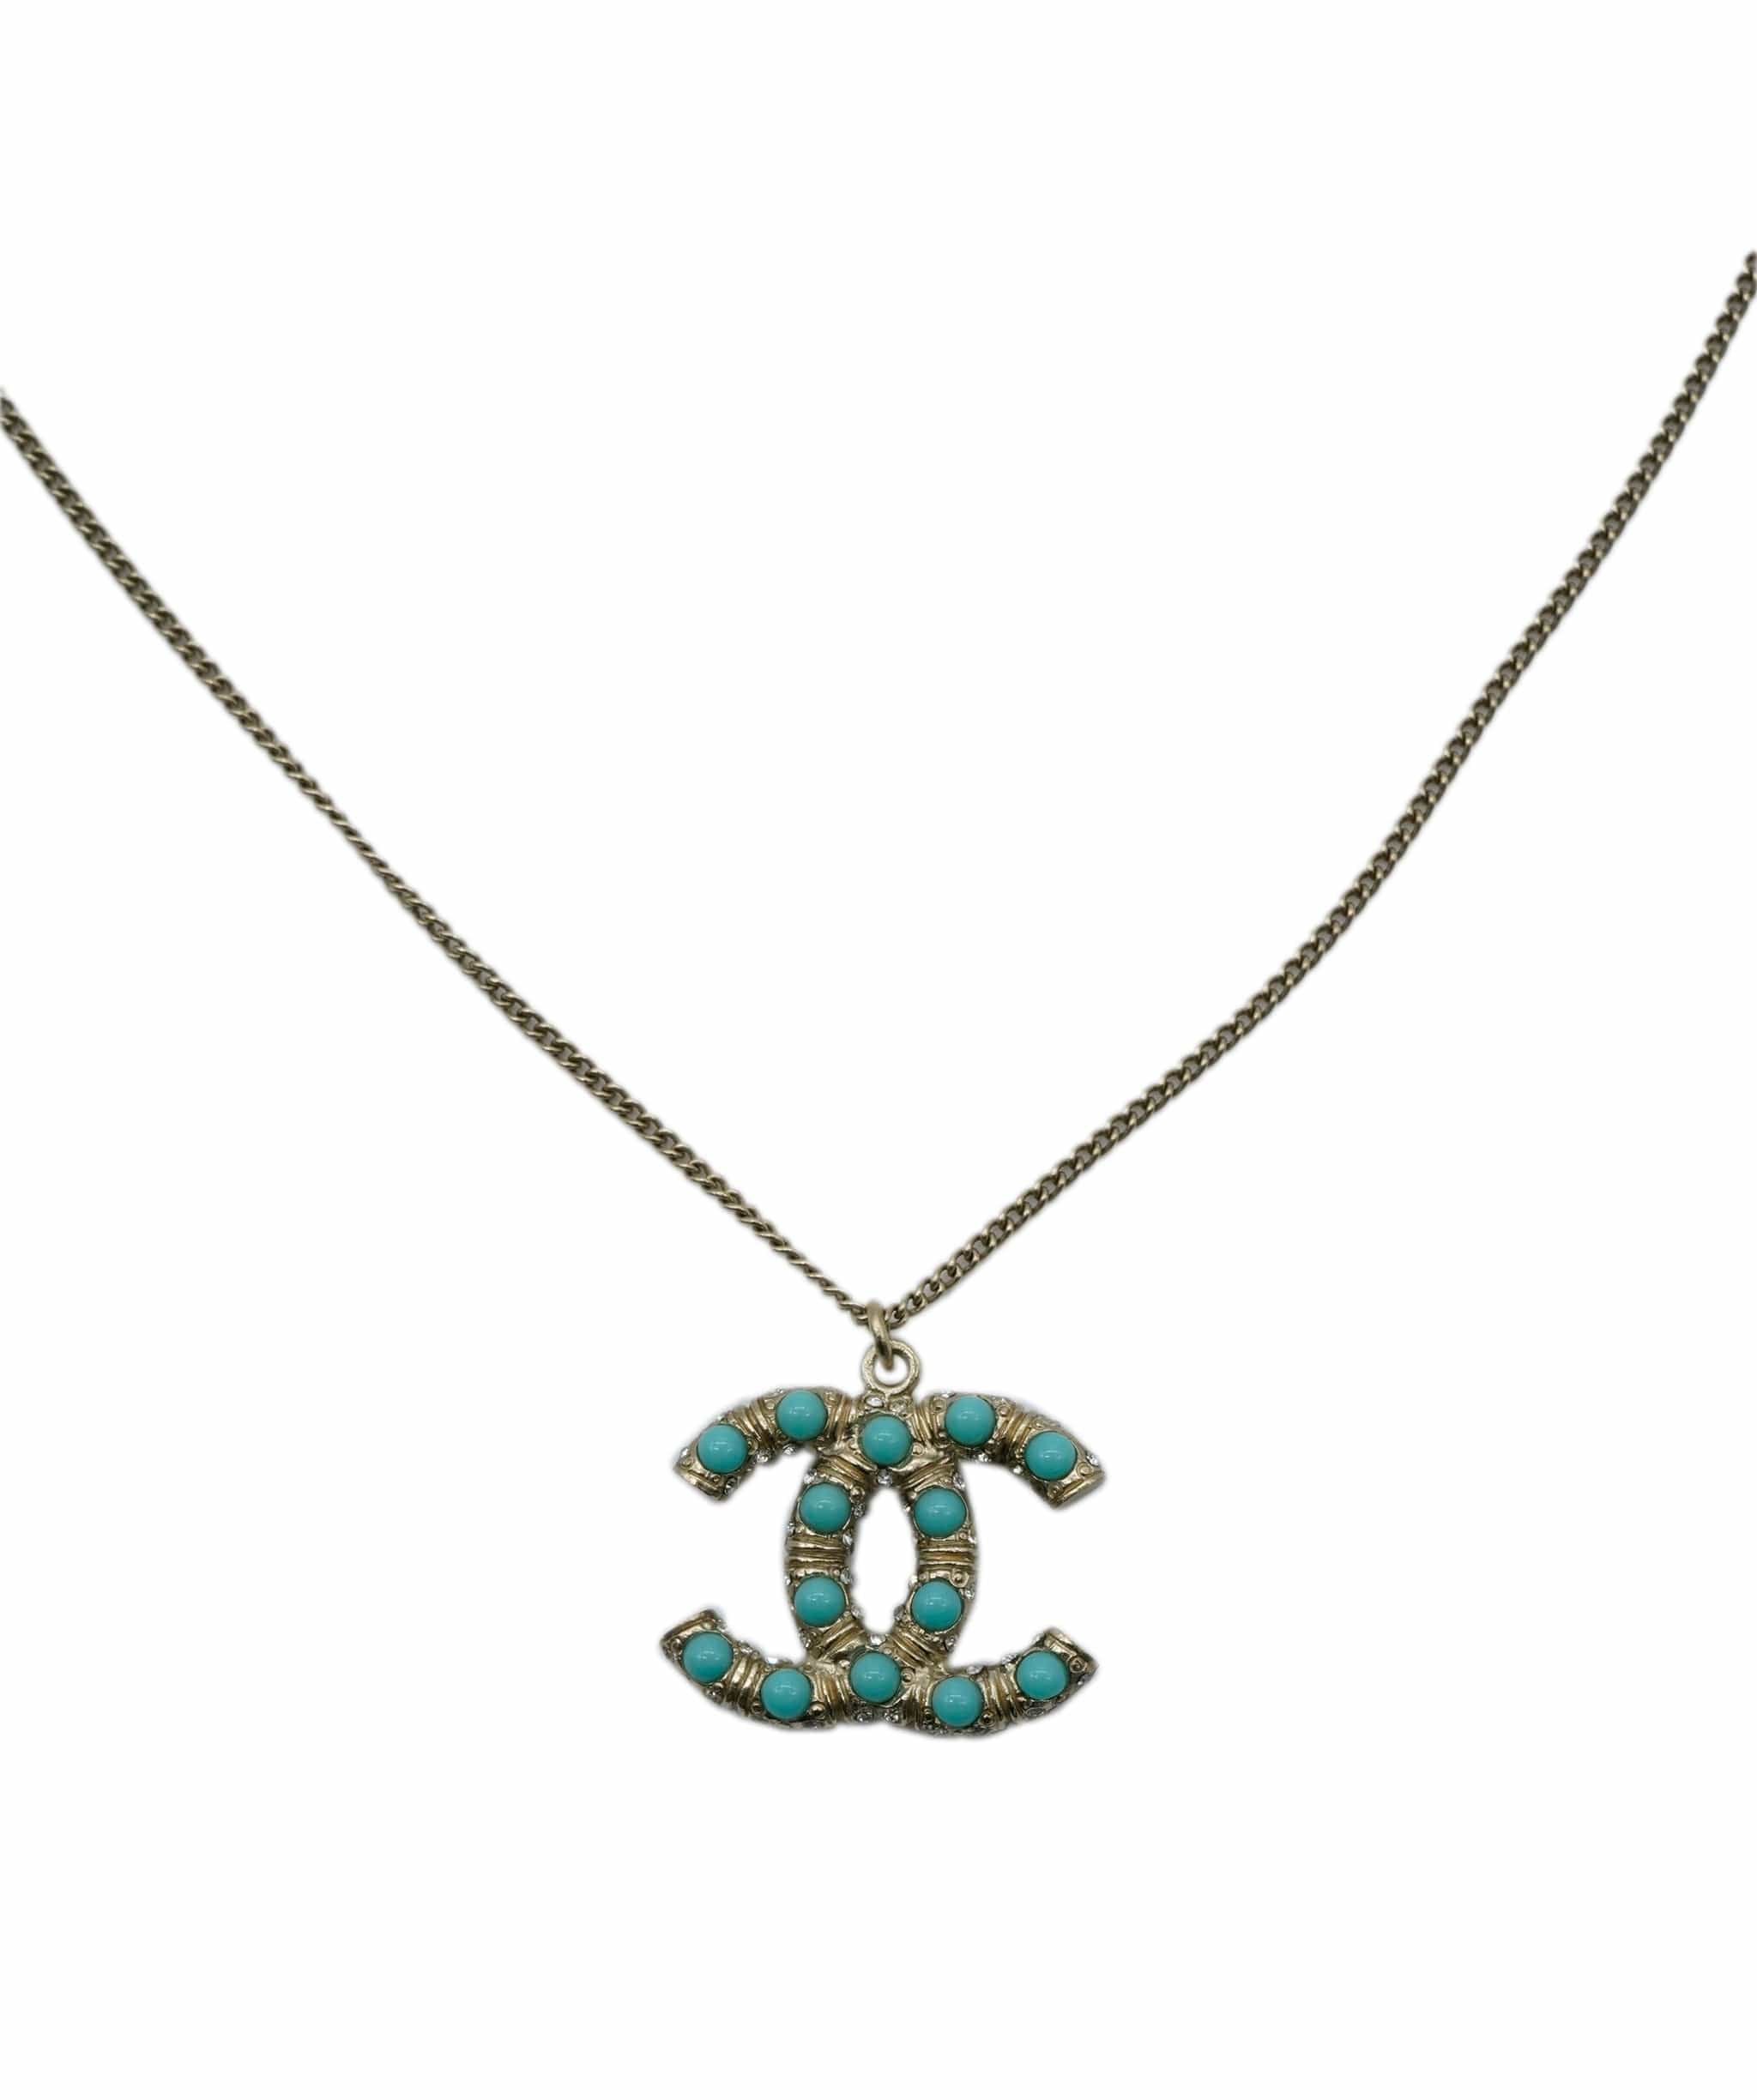 Chanel Chanel bronze necklace - AWL2746